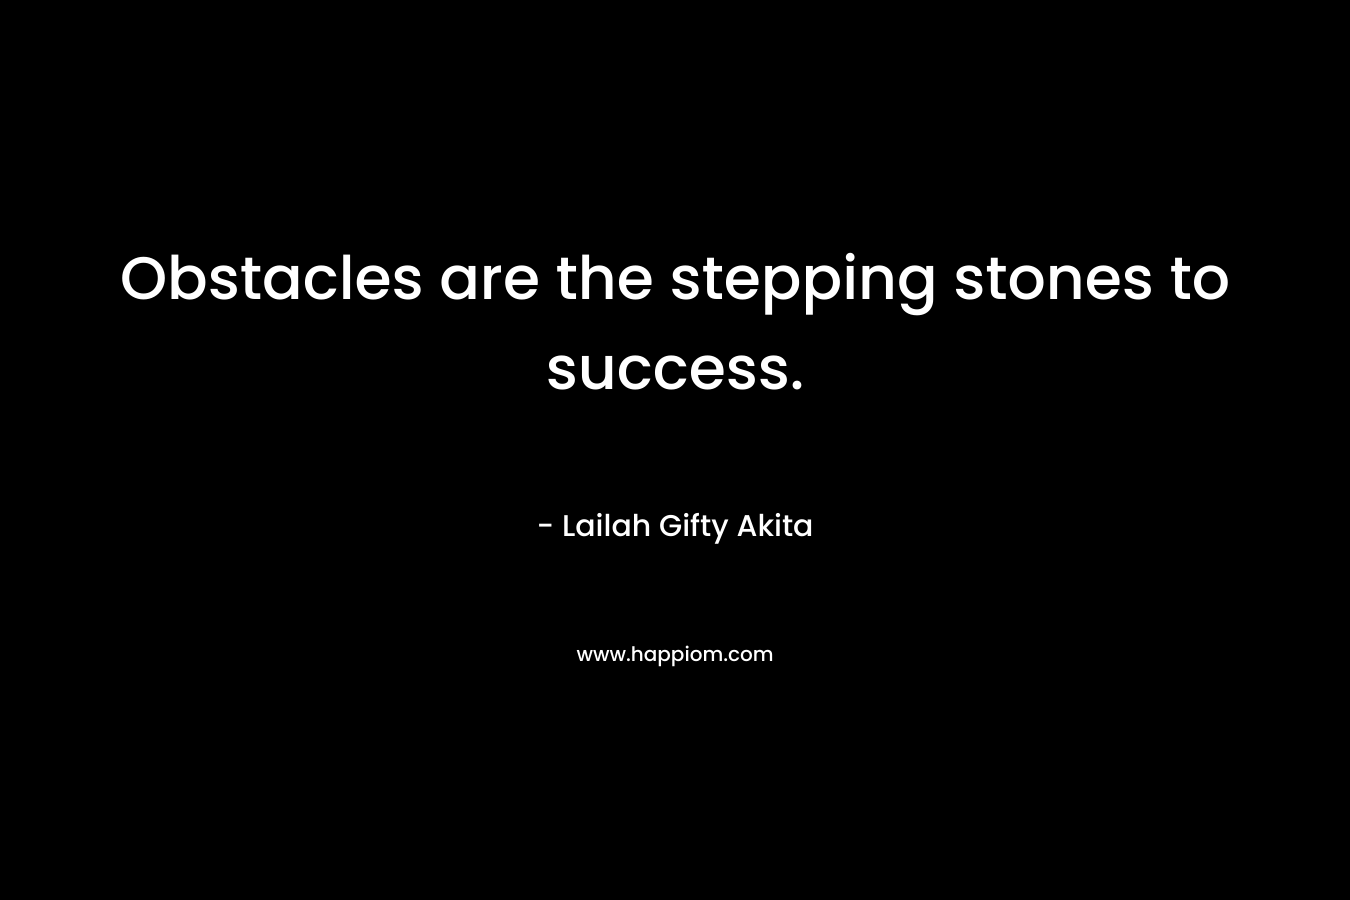 Obstacles are the stepping stones to success. – Lailah Gifty Akita